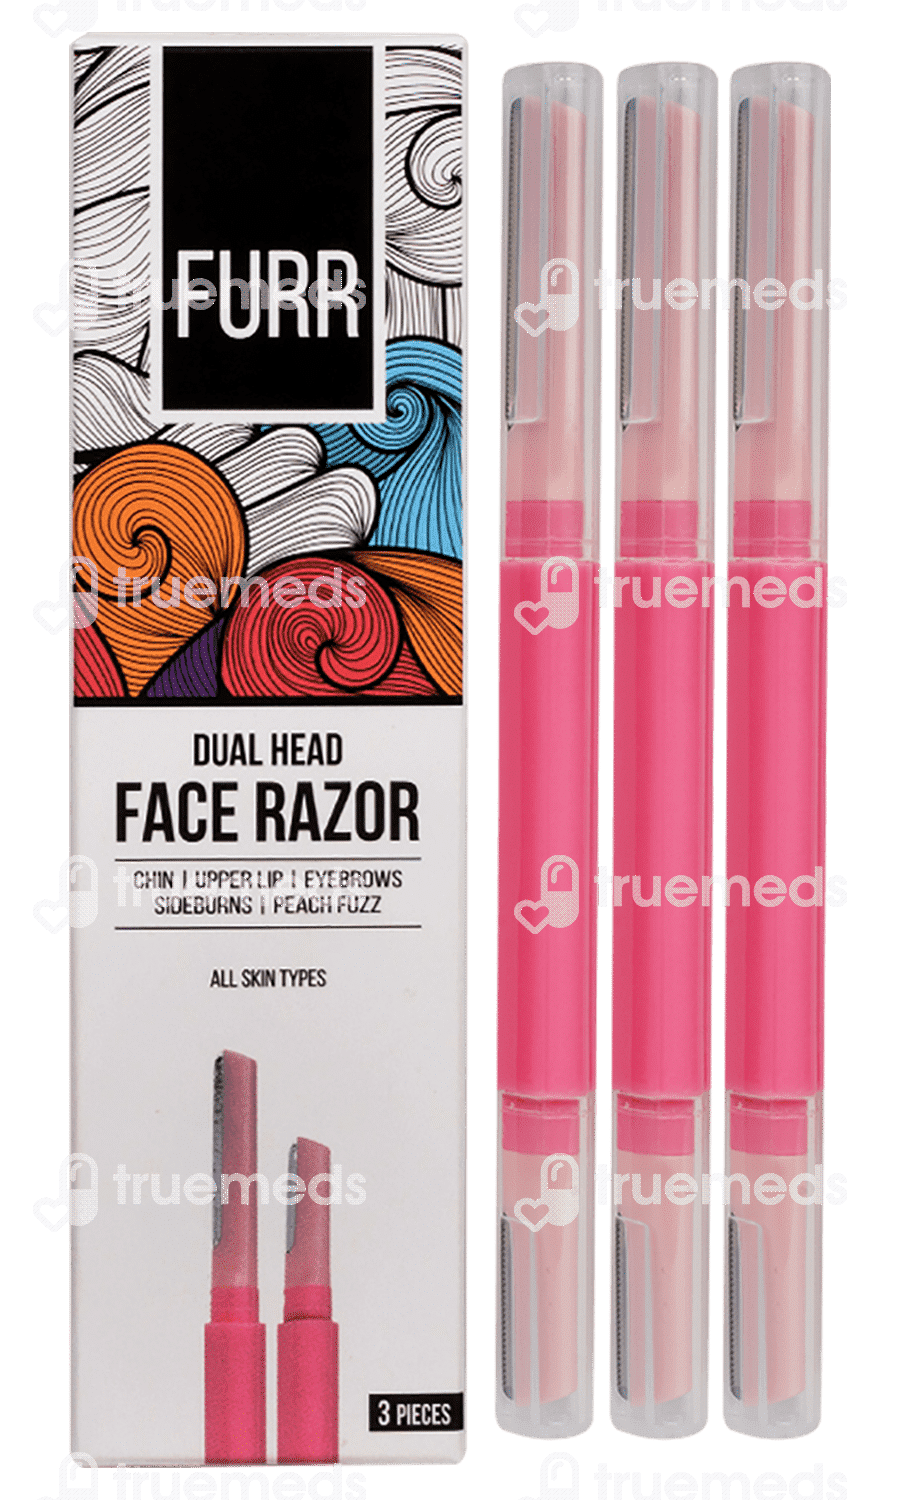 https://assets.truemeds.in/Images/ProductImage/TM-HECA1-000582/furr-by-pee-safe-dual-head-face-razor-pack-of-3_furr-by-pee-safe-dual-head-face-razor-pack-of-3--TM-HECA1-000582_1.png